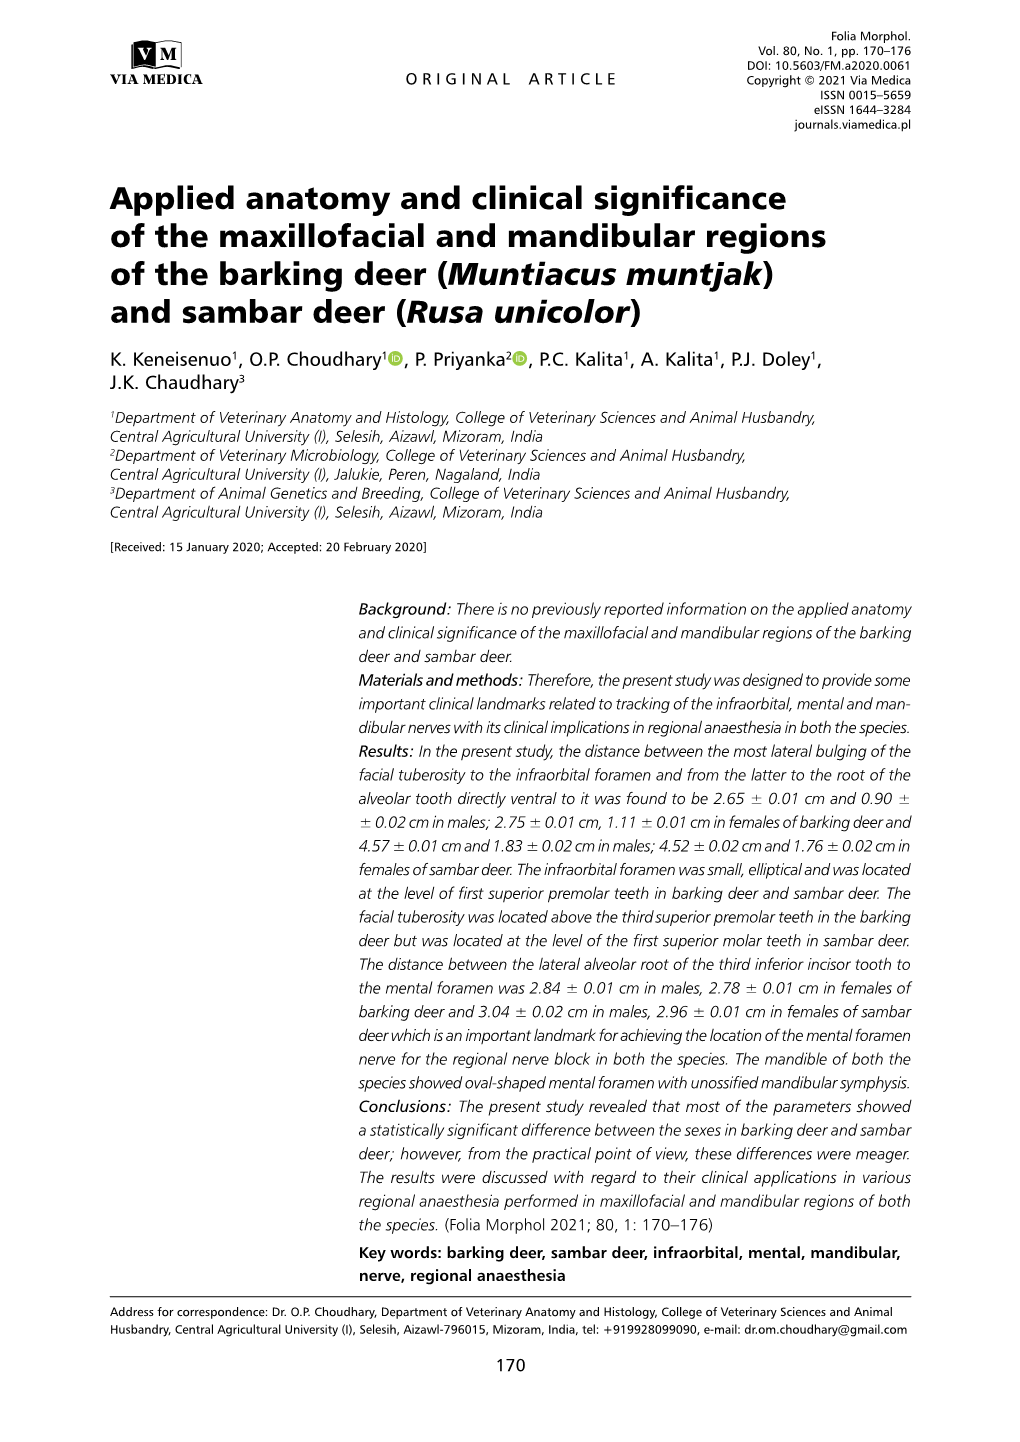 Applied Anatomy and Clinical Significance of the Maxillofacial and Mandibular Regions of the Barking Deer (Muntiacus Muntjak) and Sambar Deer (Rusa Unicolor) K